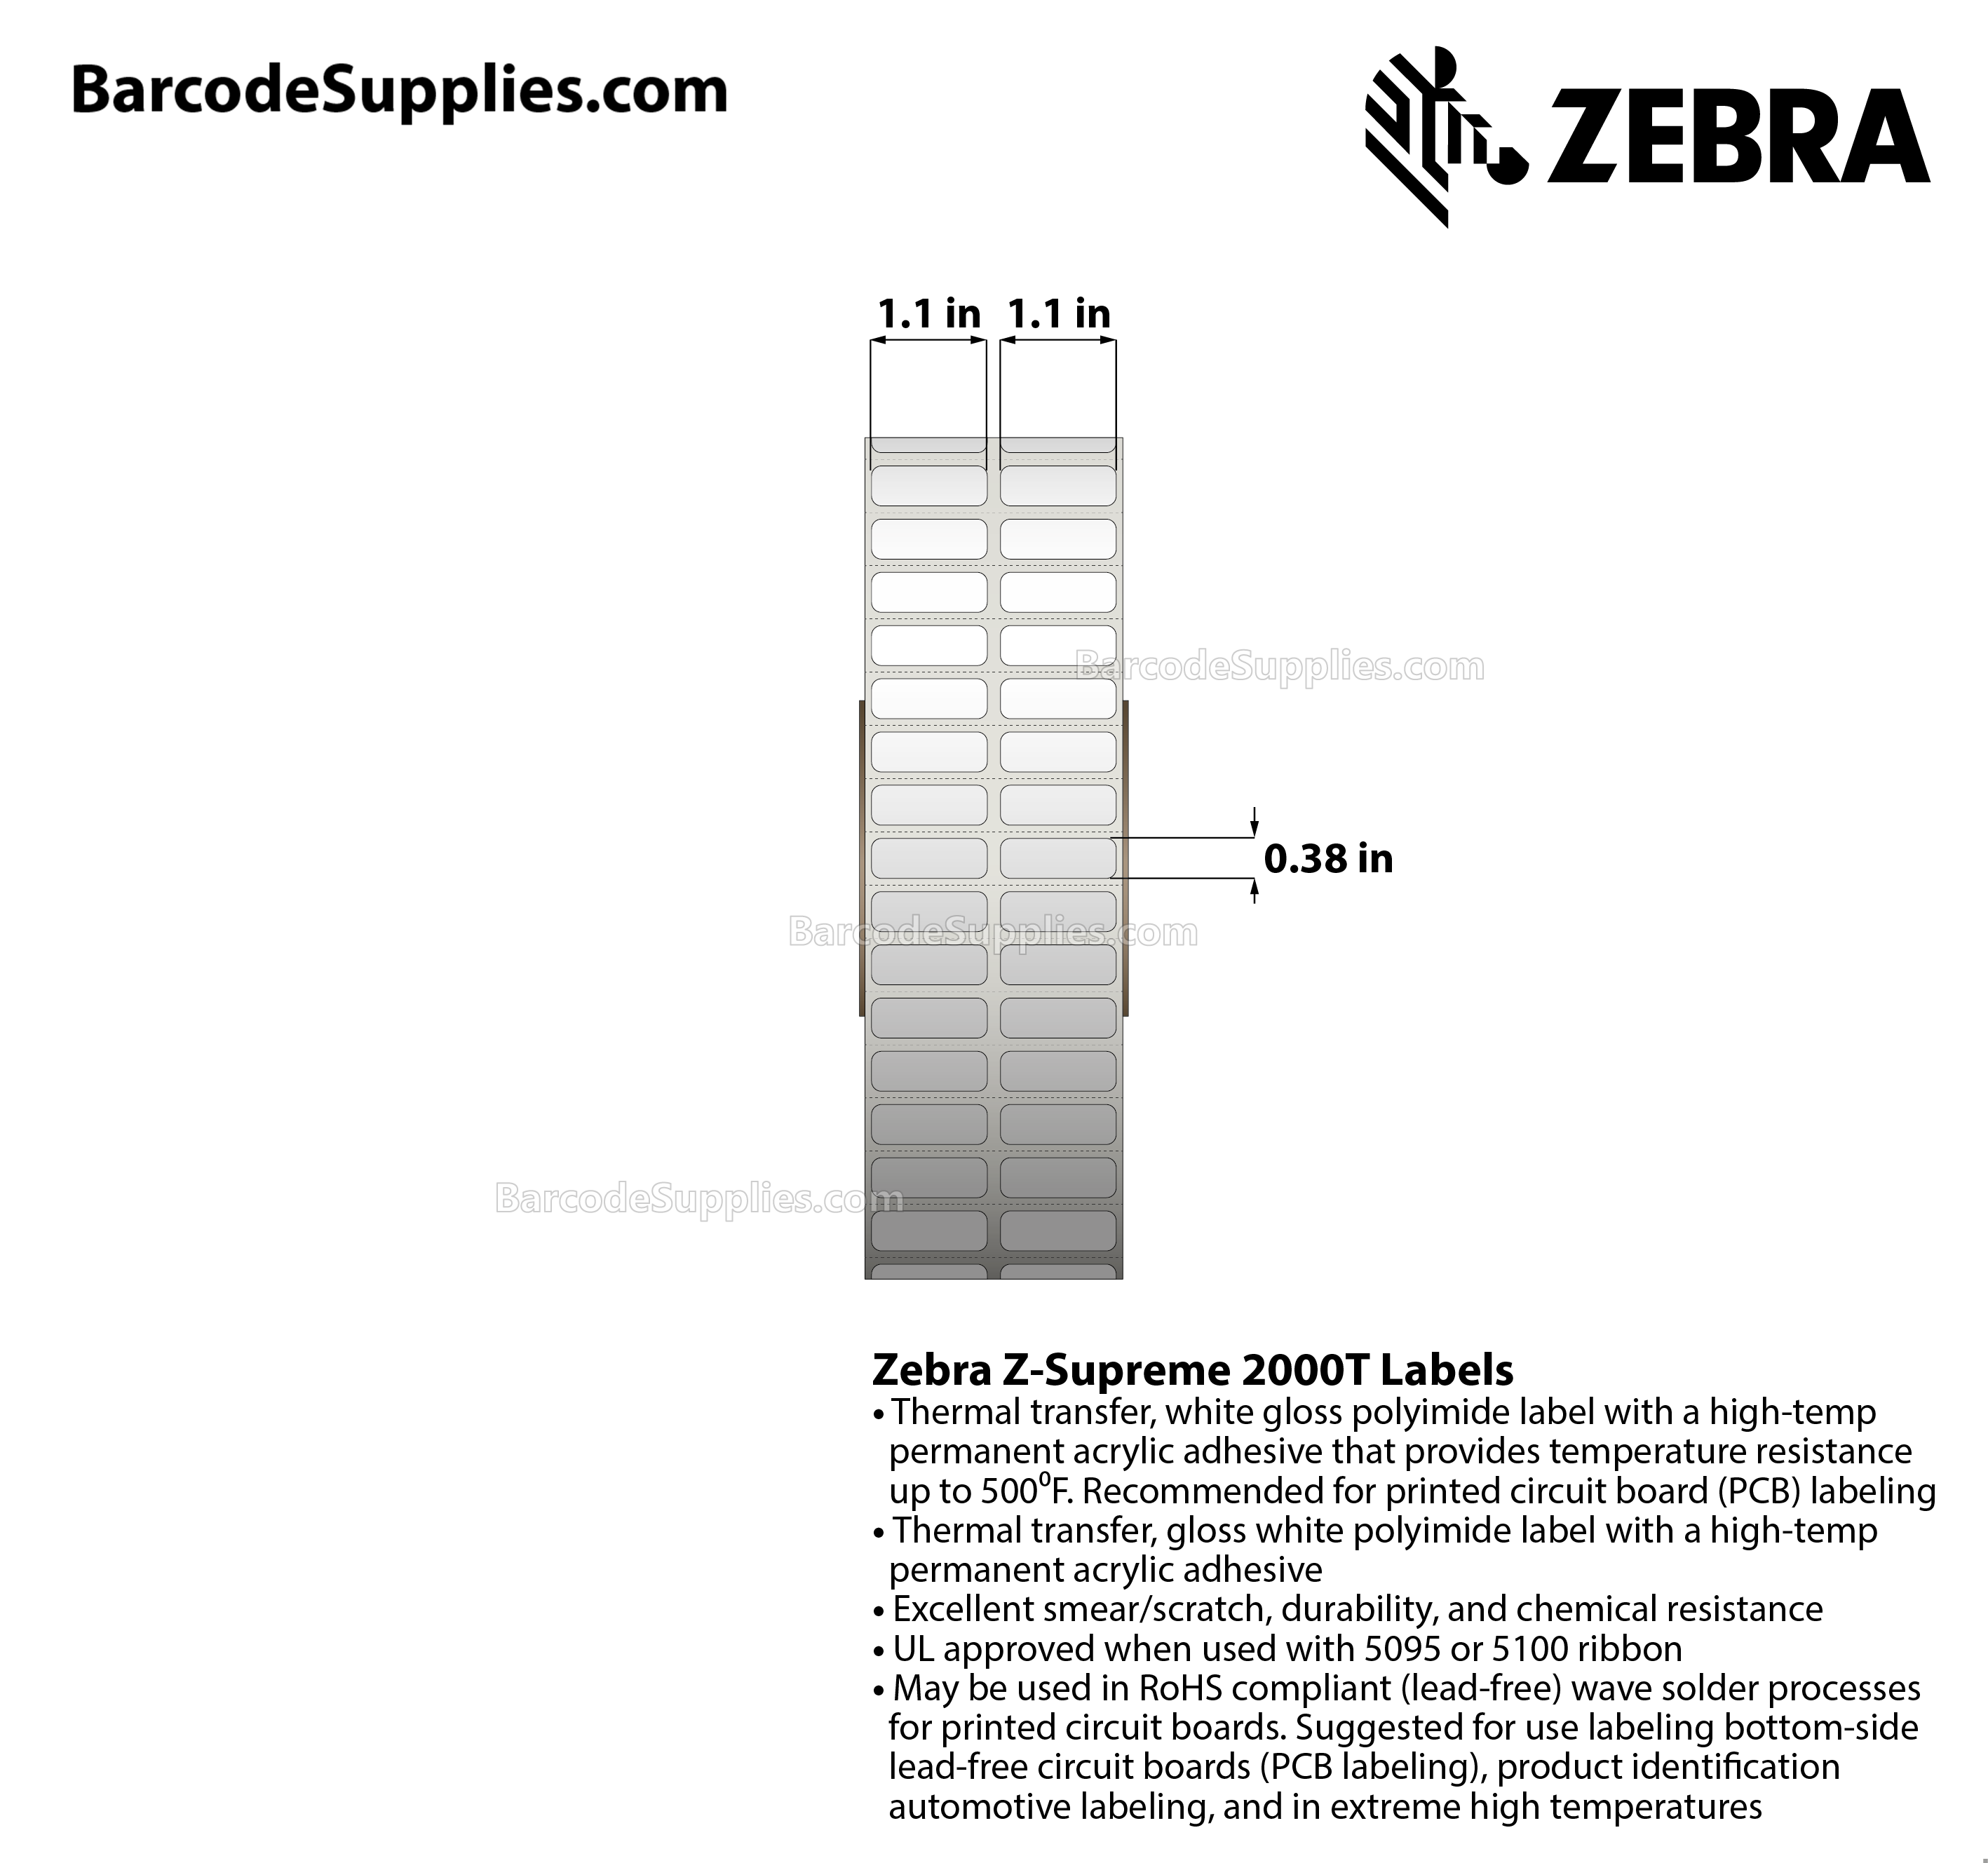 1.1 x 0.38 Thermal Transfer White Z-Supreme 2000T (2-Across) Labels With High-temp Adhesive - Perforated - 10000 Labels Per Roll - Carton Of 1 Rolls - 10000 Labels Total - MPN: 10023203